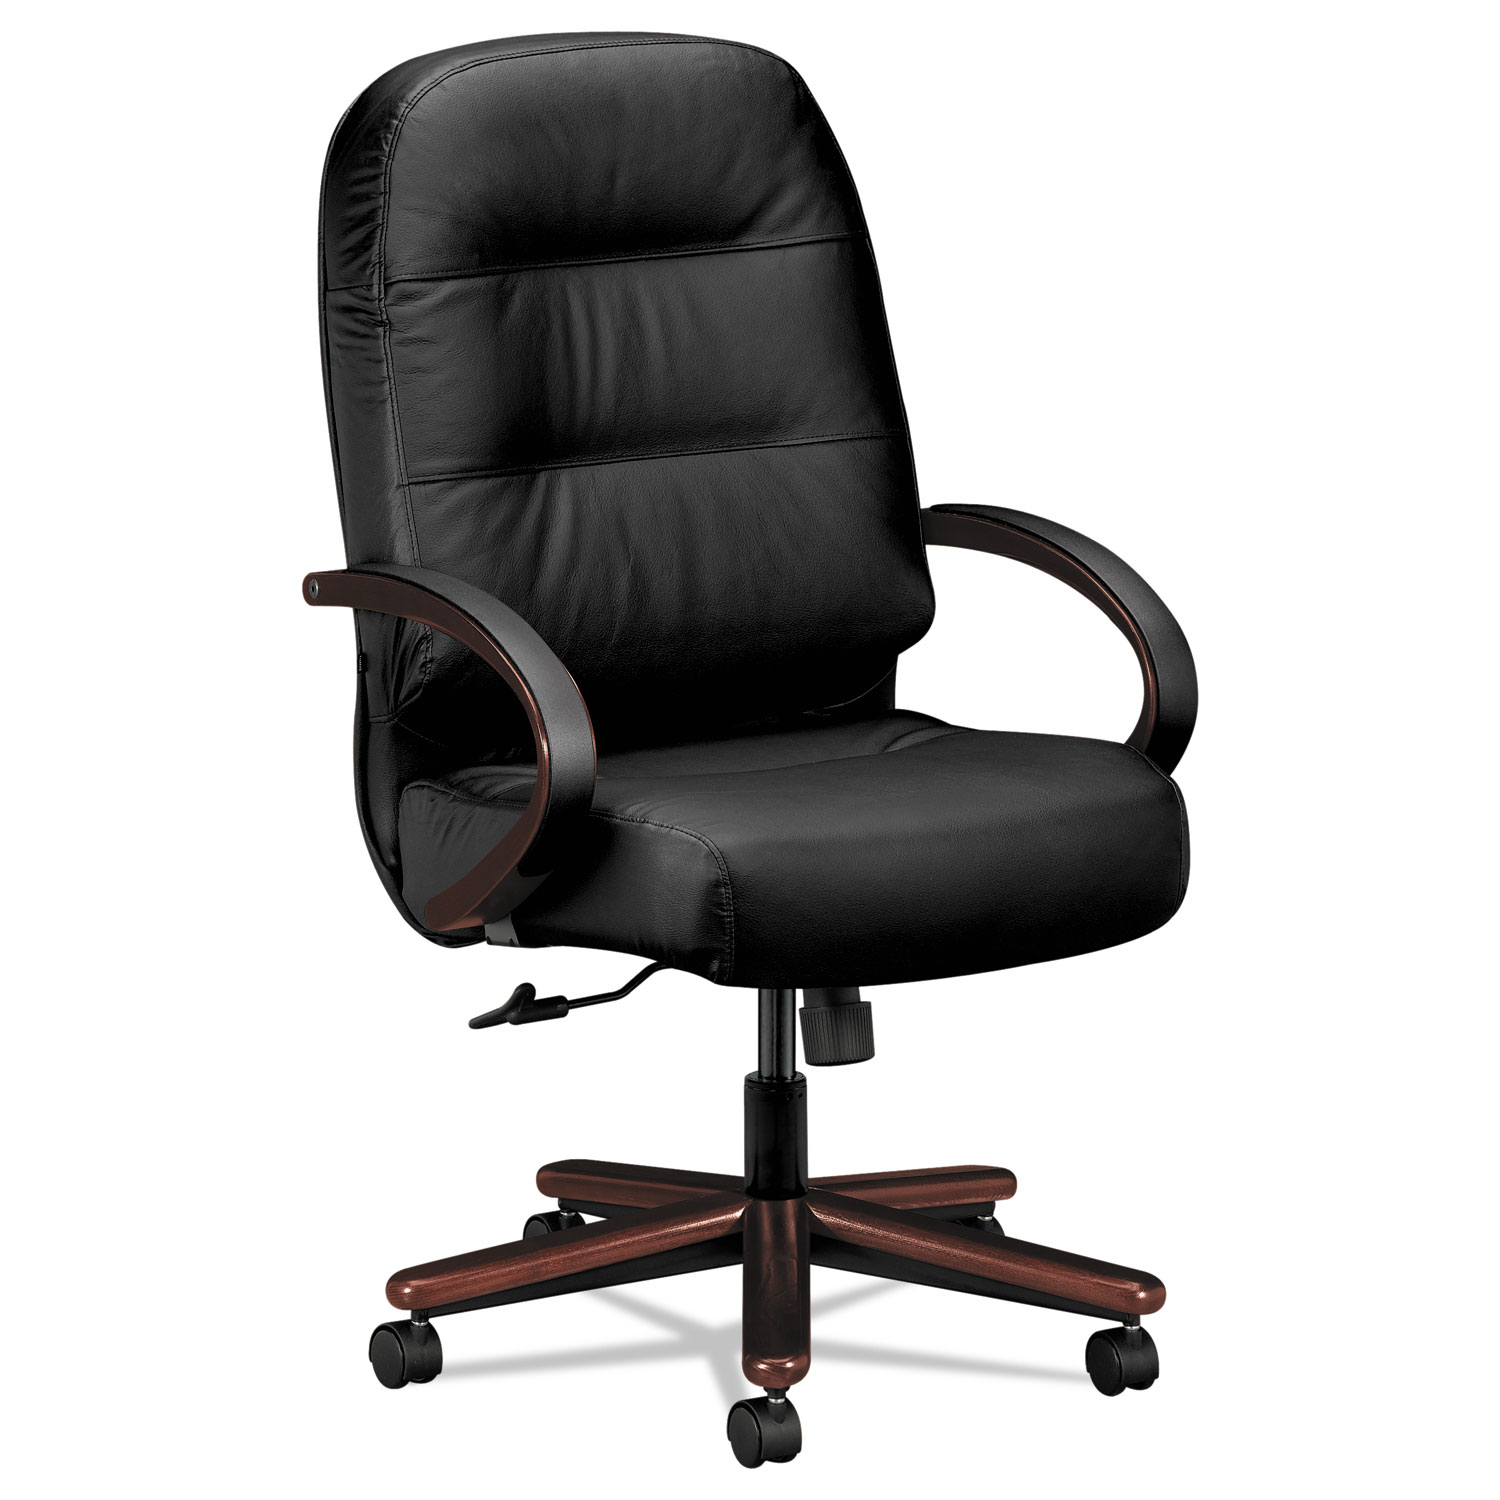 2190 Pillow-Soft Wood Series Executive High-Back Chair, Mahogany/Black Leather